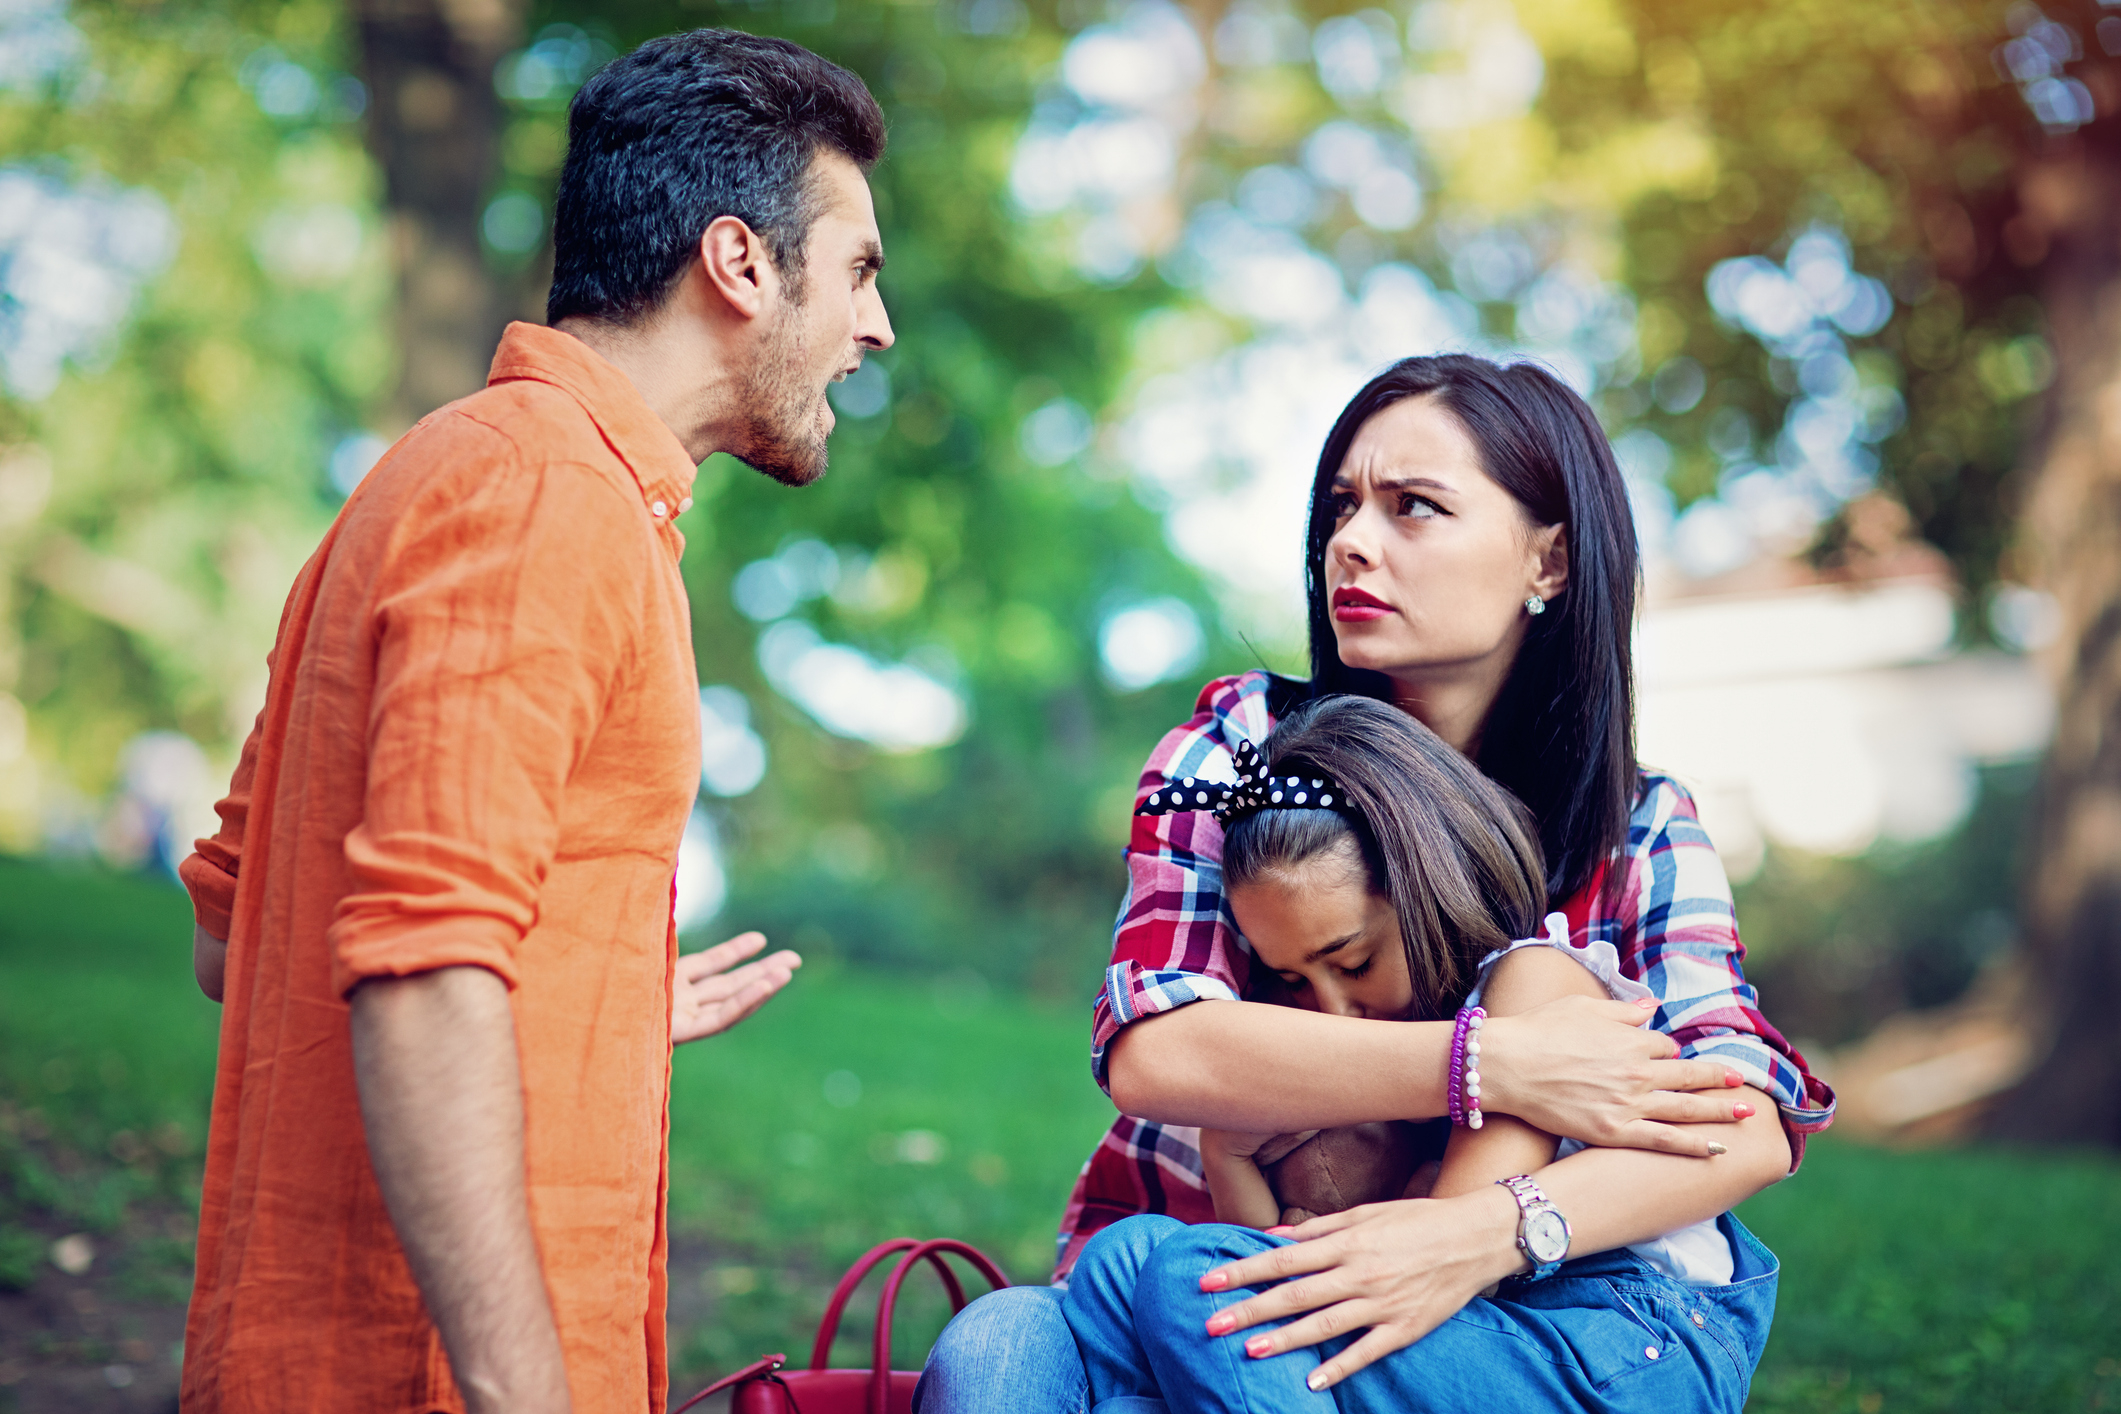 A man and woman having a disagreement while a young girl hugs the woman&#x27;s leg, outdoors